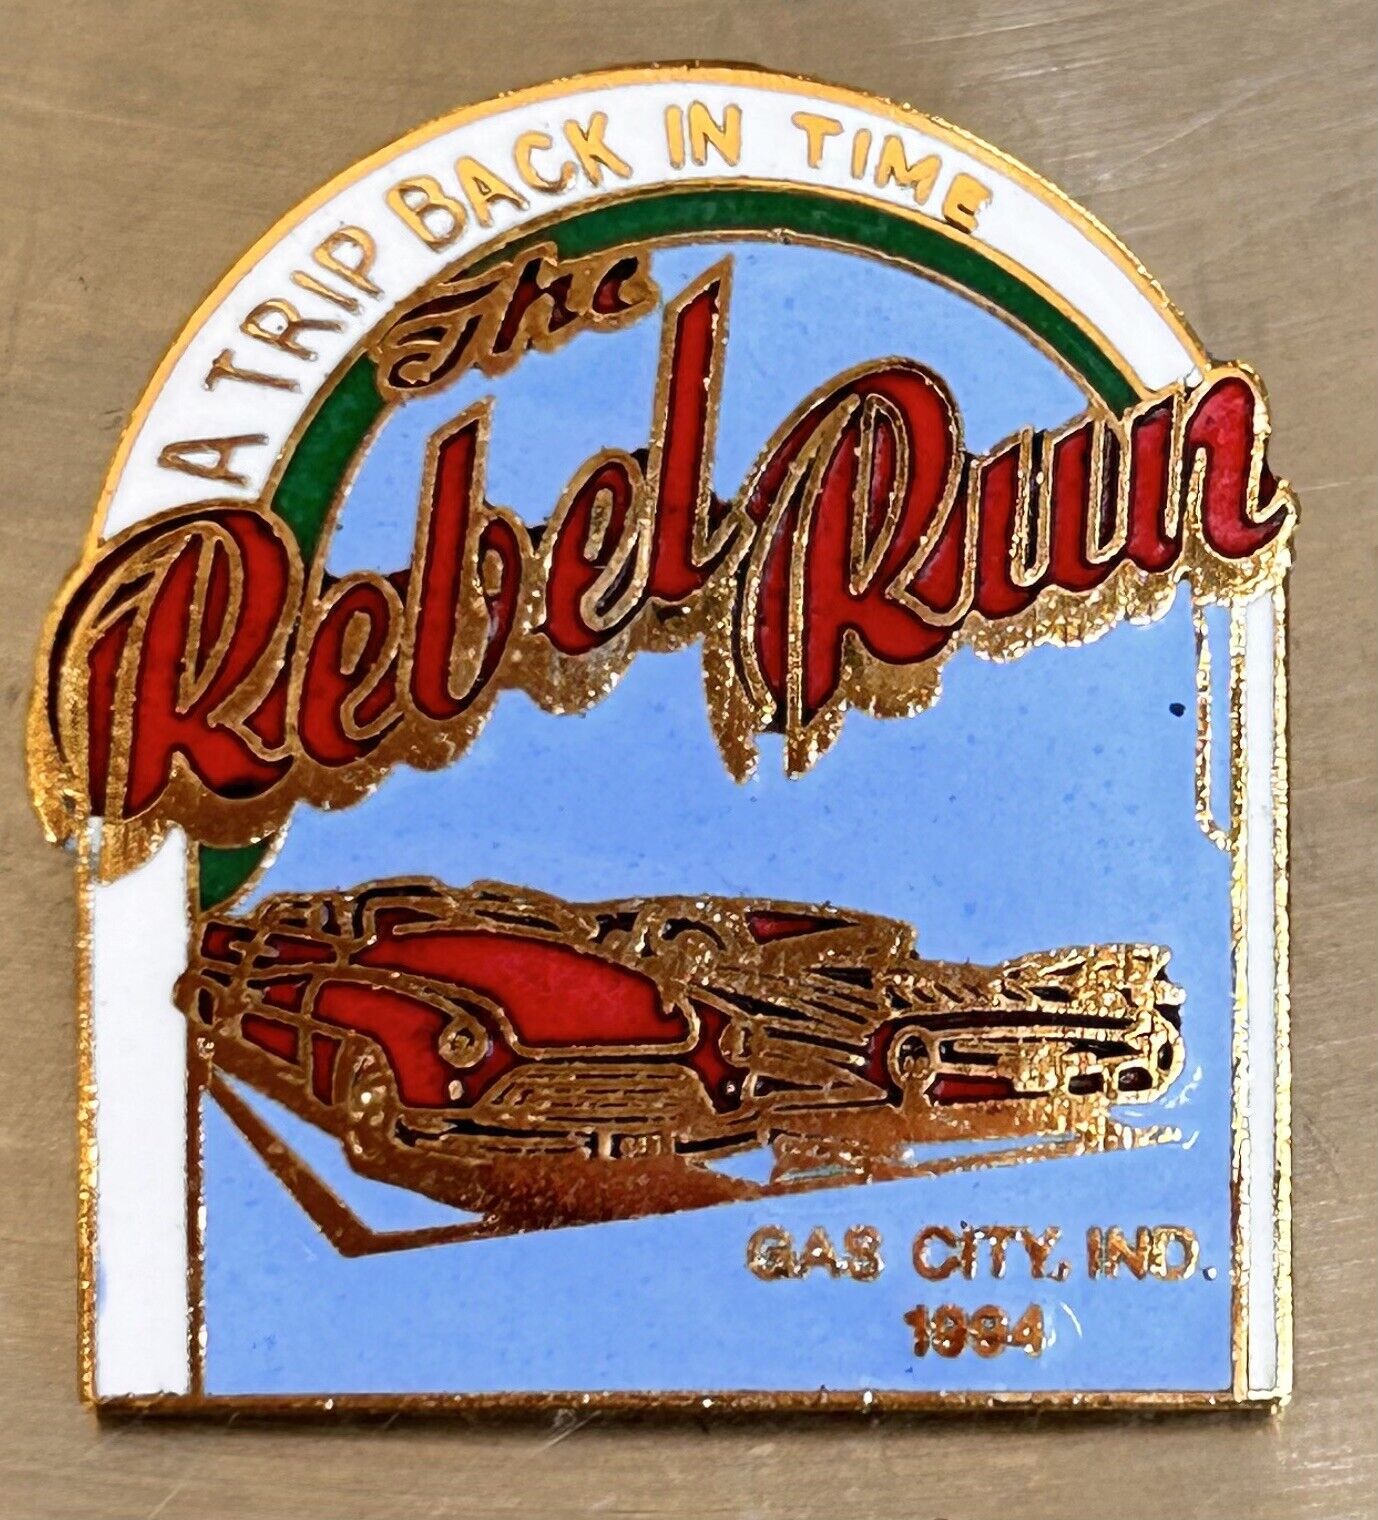 A Trip Back In Time REBEL RUN Gas City, INDIANA 1994 PIN